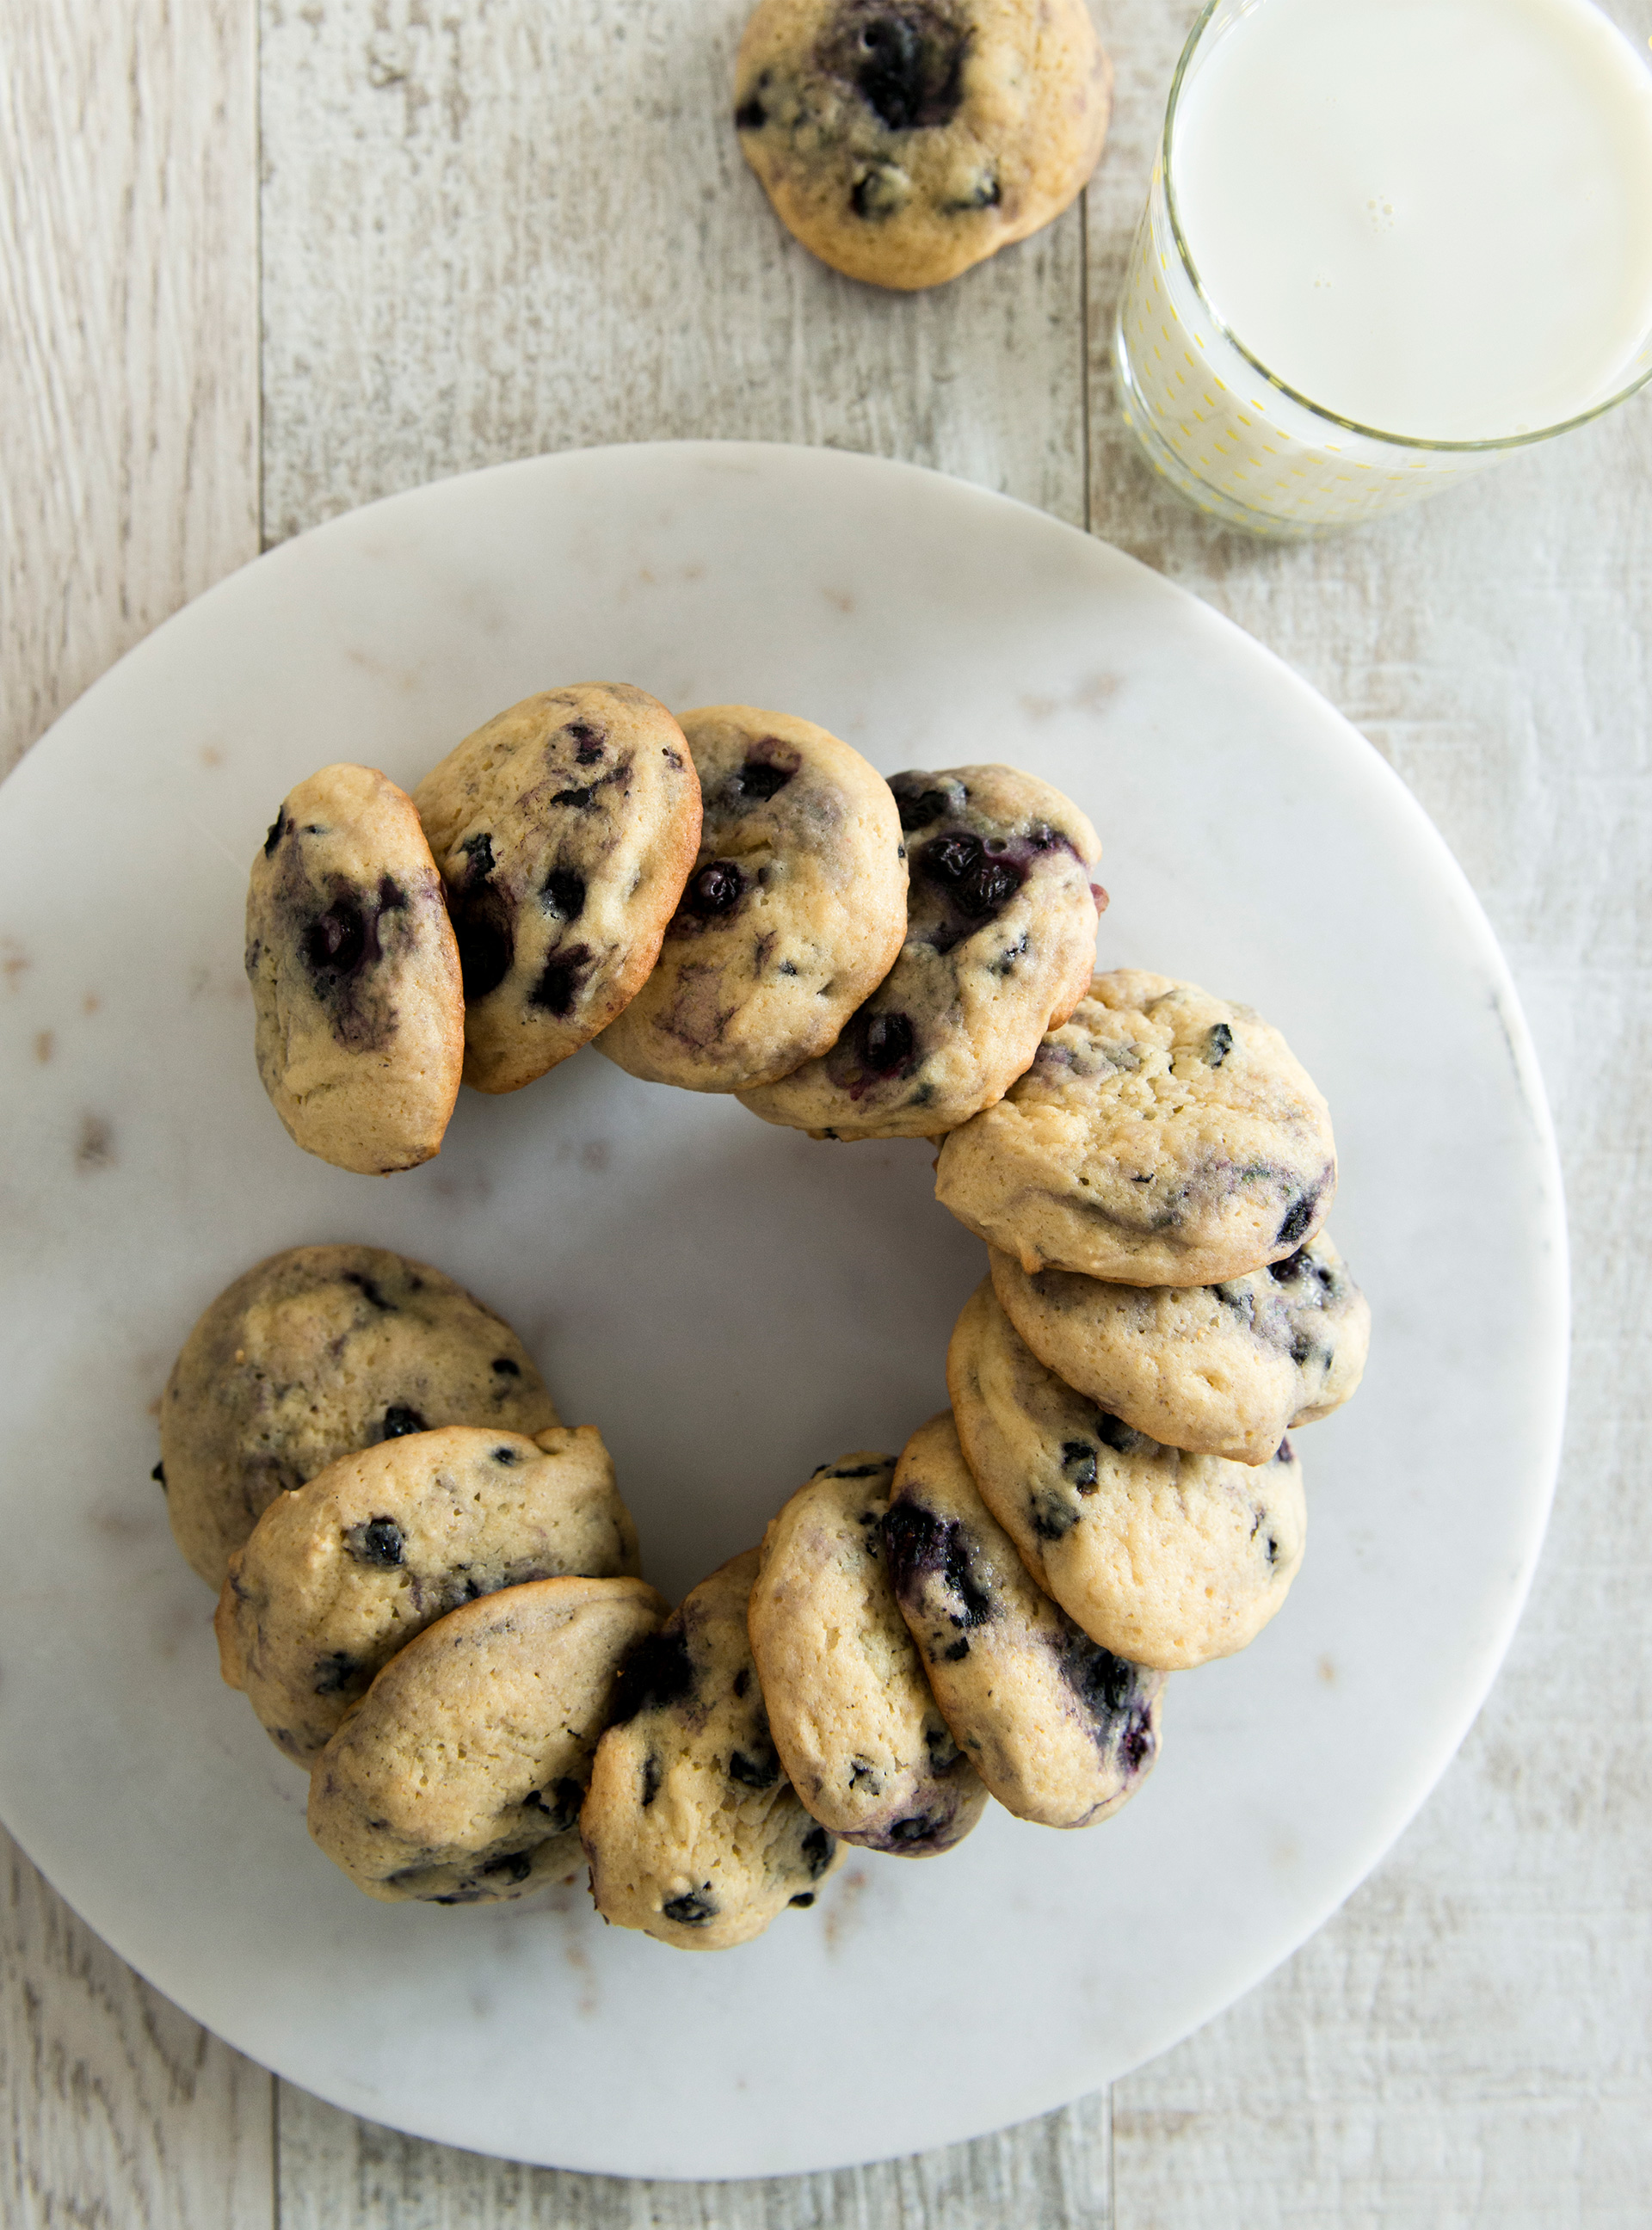 Honey and Blueberry Cookies